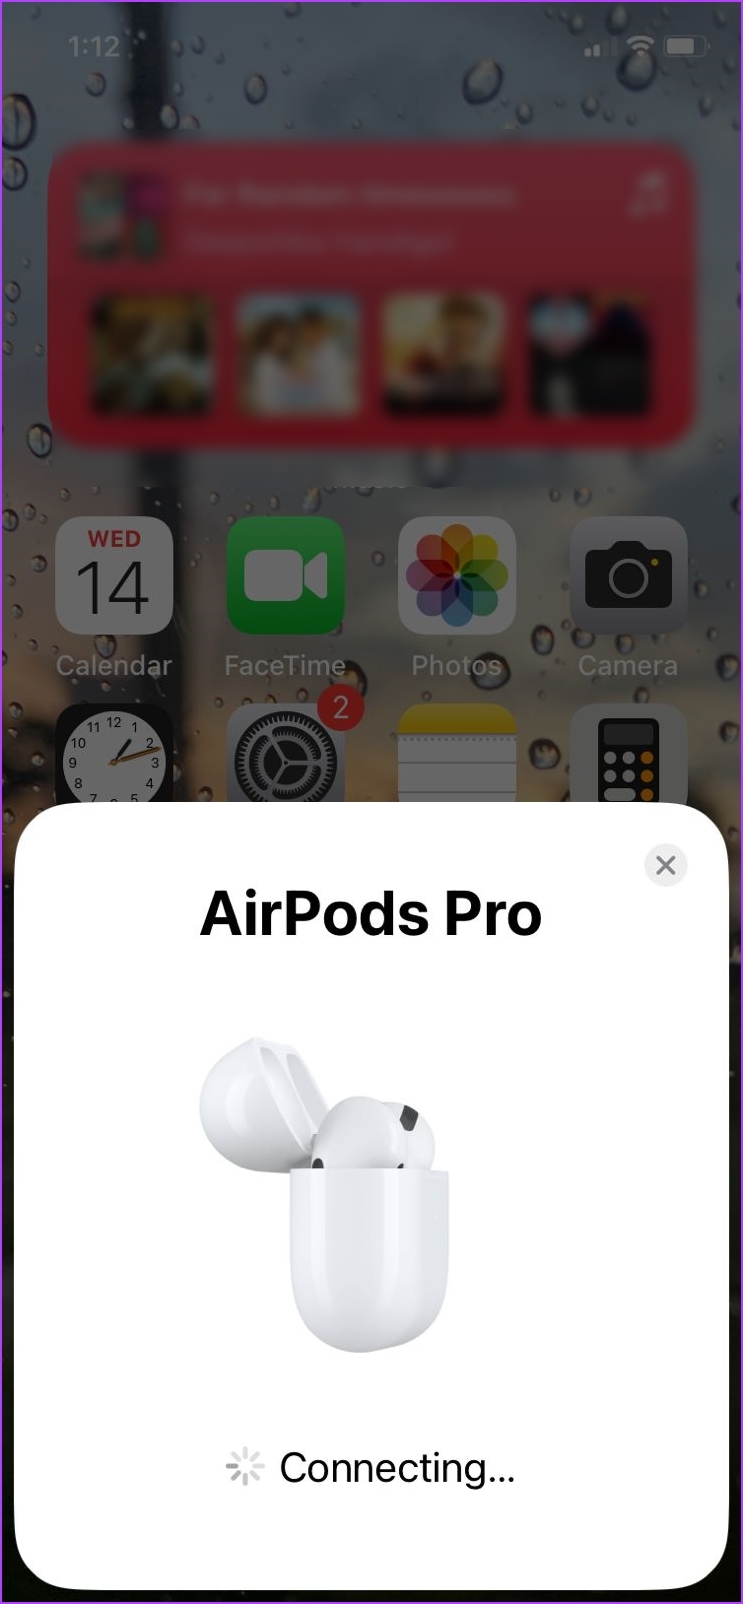 Connecting AirPods